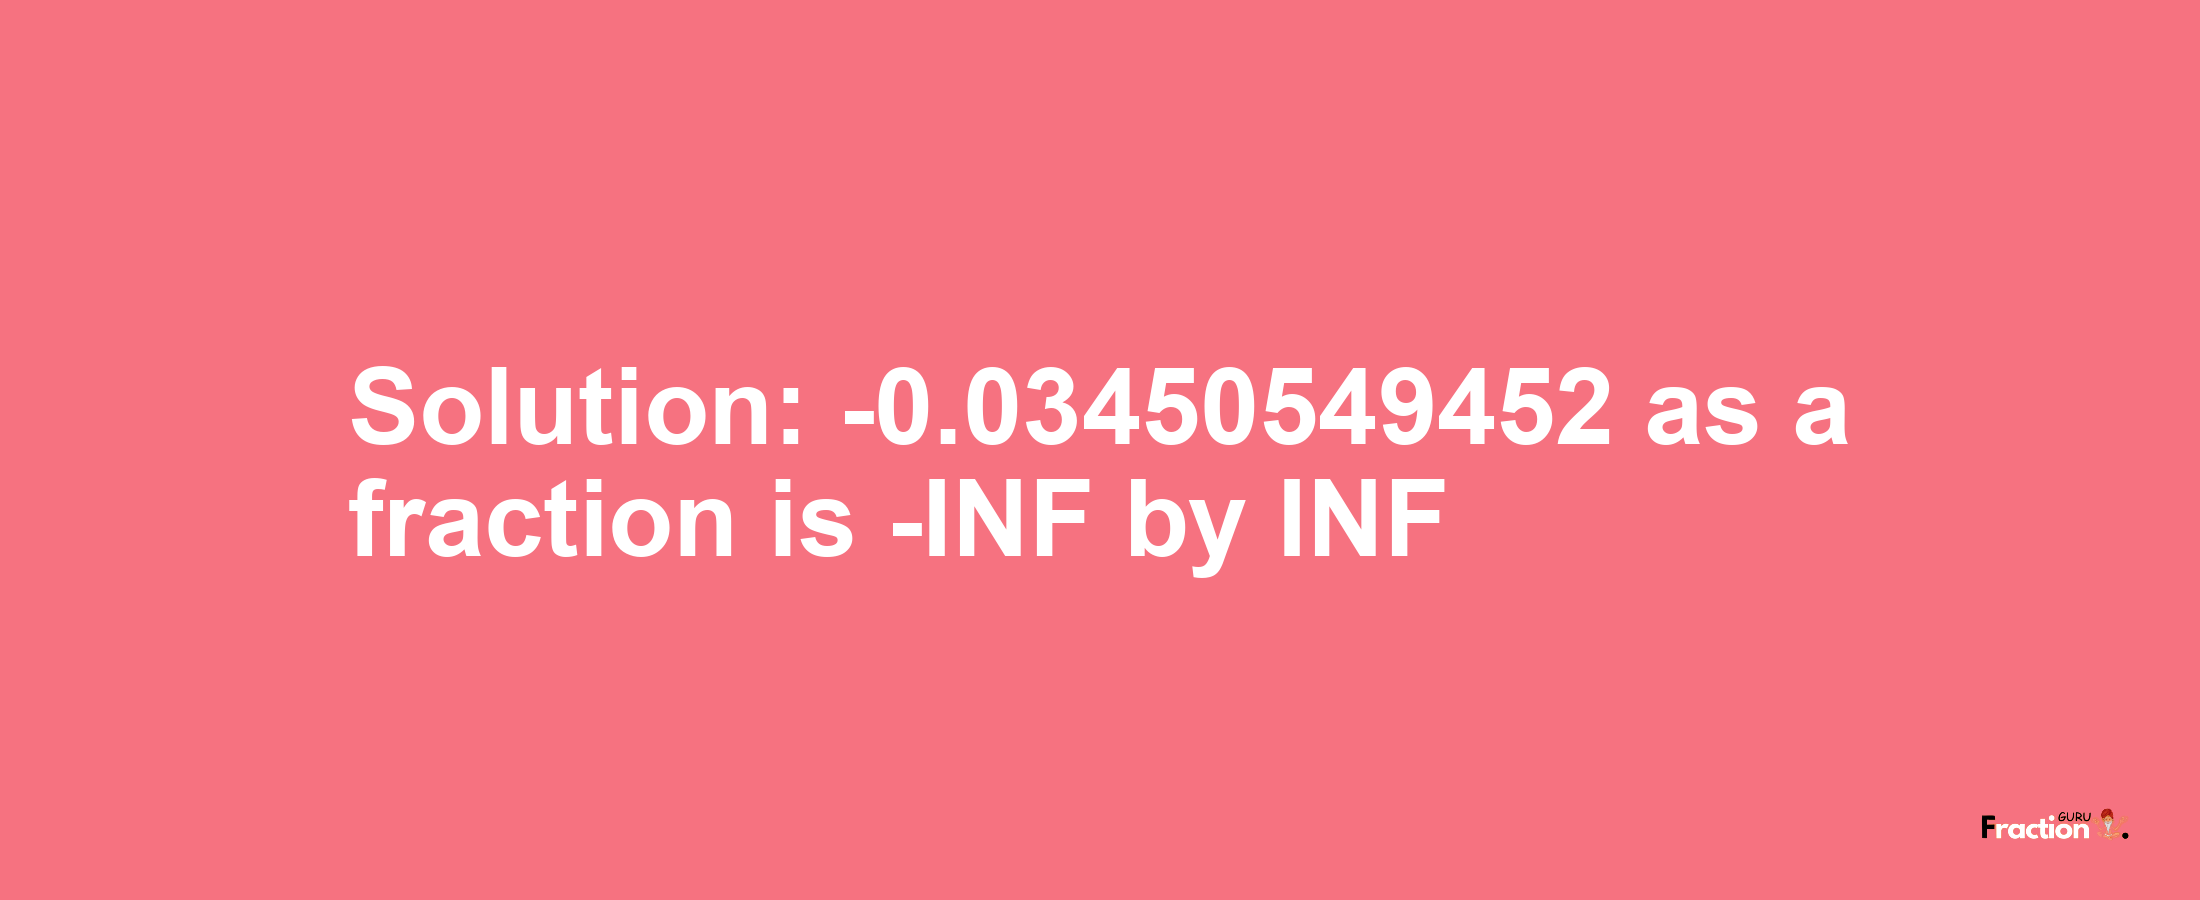 Solution:-0.03450549452 as a fraction is -INF/INF